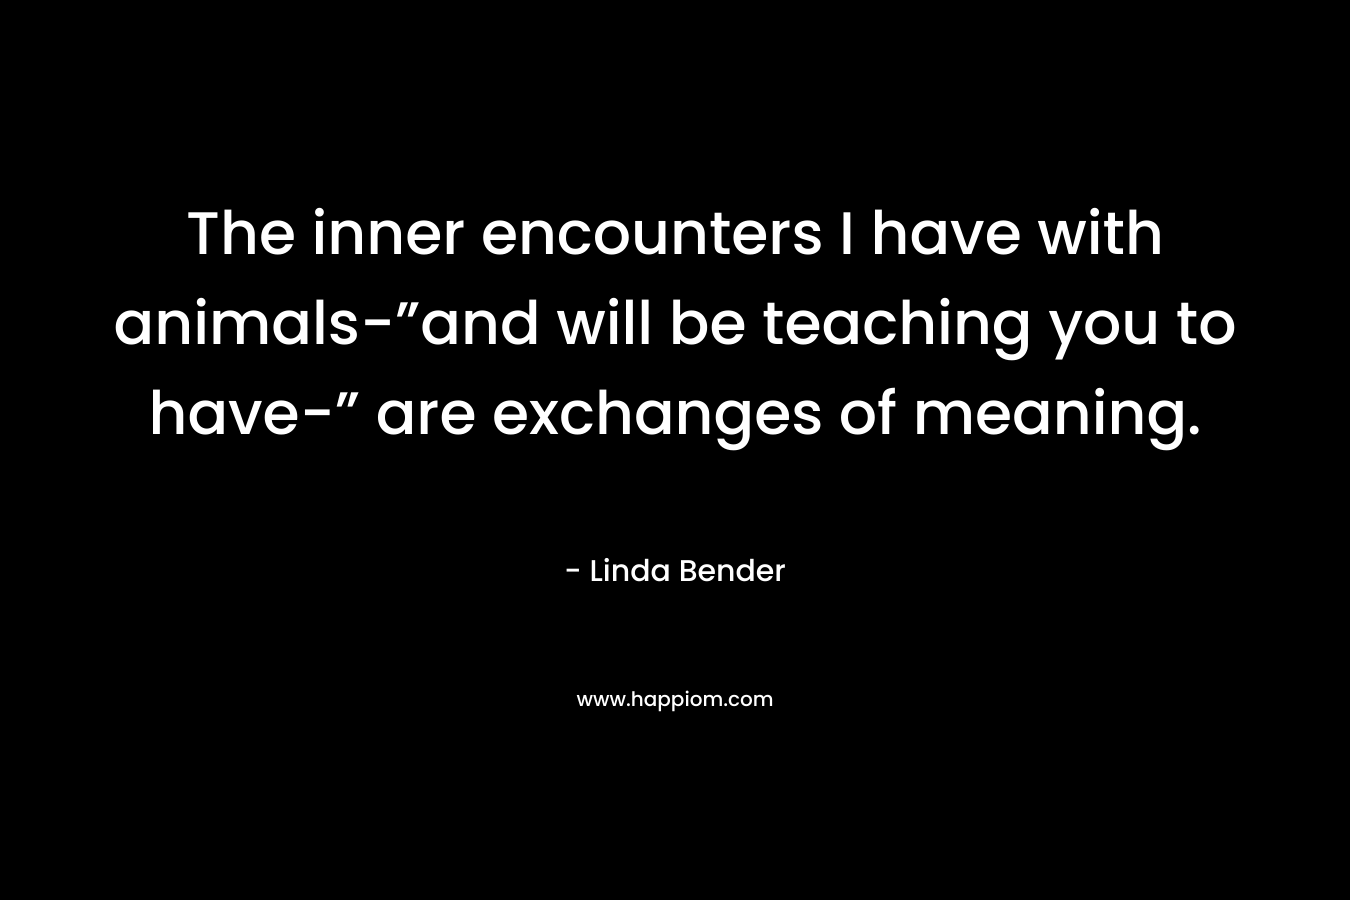 The inner encounters I have with animals-”and will be teaching you to have-” are exchanges of meaning.